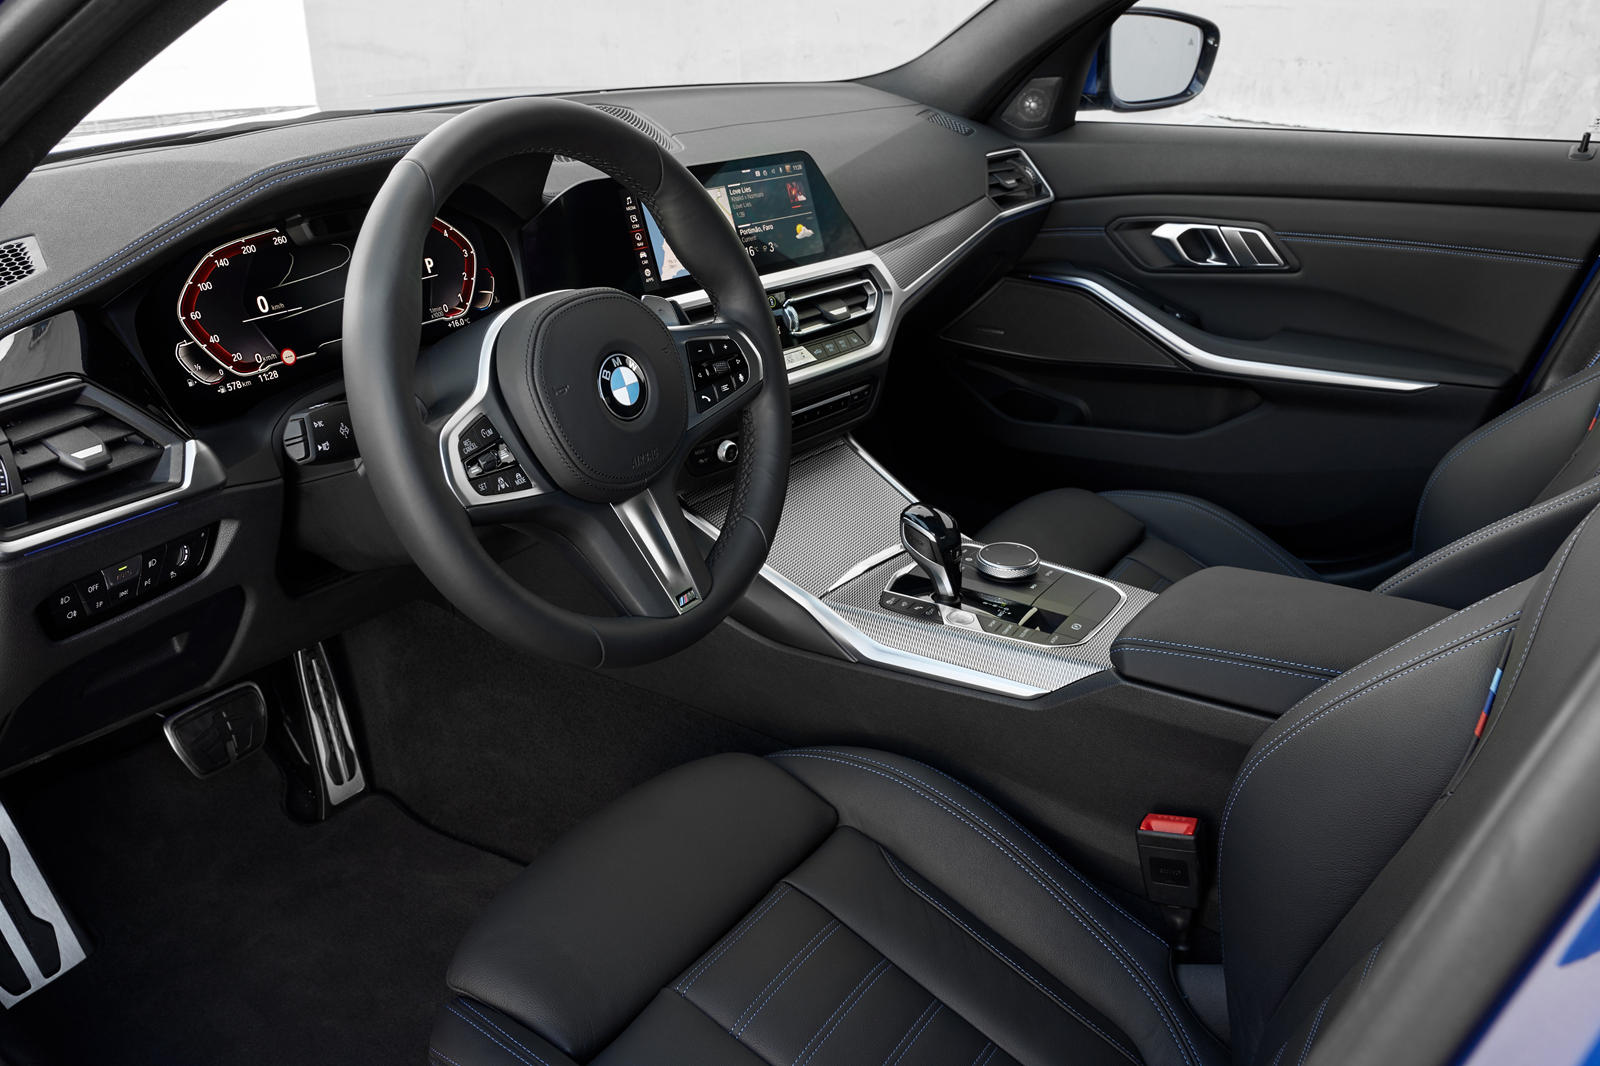 2022 BMW 3 Series Sedan Interior Dimensions: Seating, Cargo Space & Trunk Size